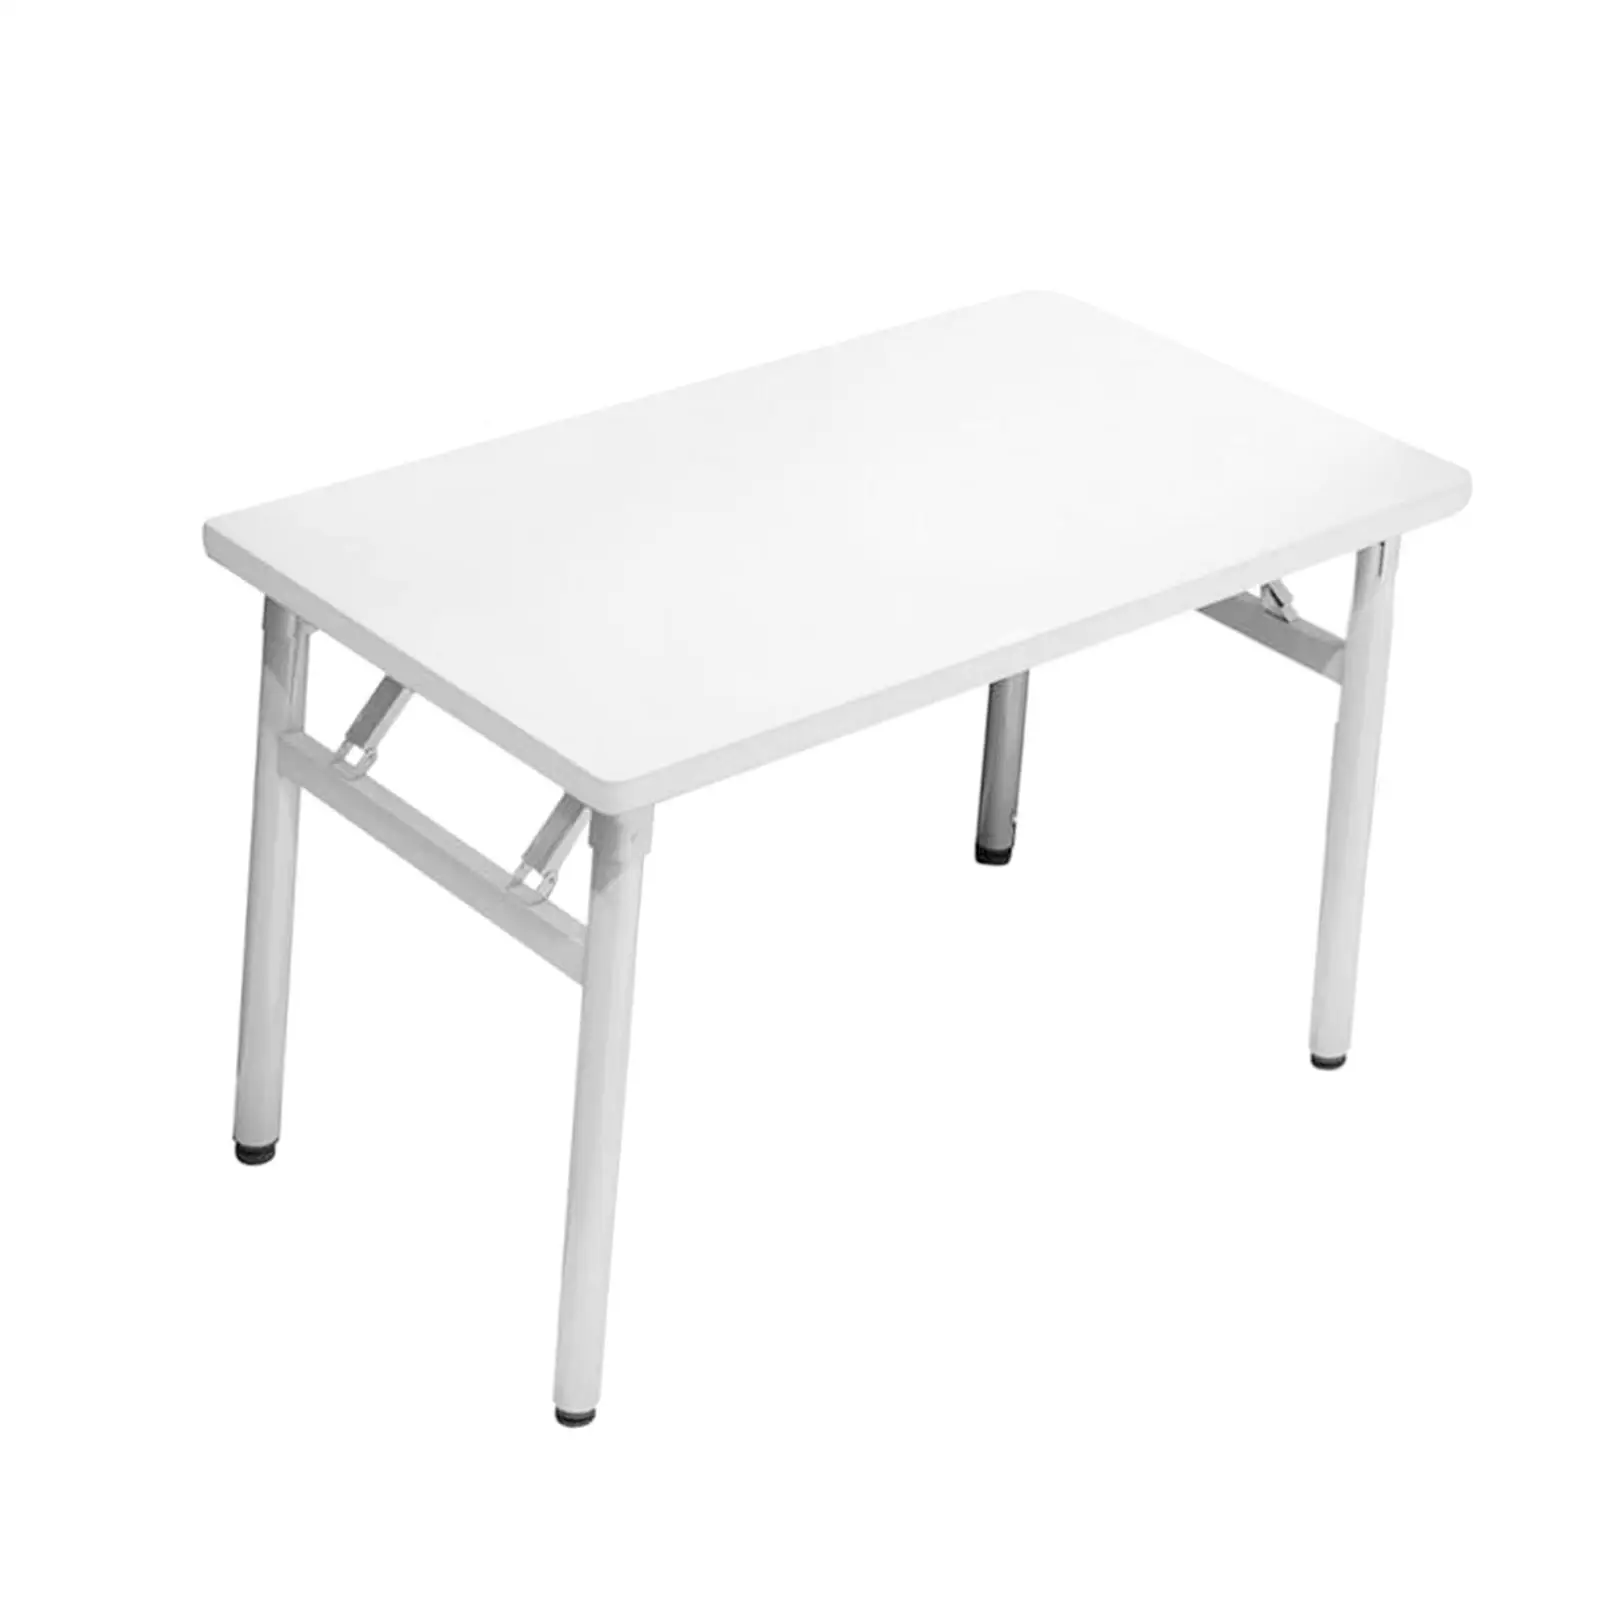 Heavy Duty Folding Snack Table Study Table Laptop Tea Coffee Picnic Table Desk Dining Table Camping Table for Picnic Indoor RV